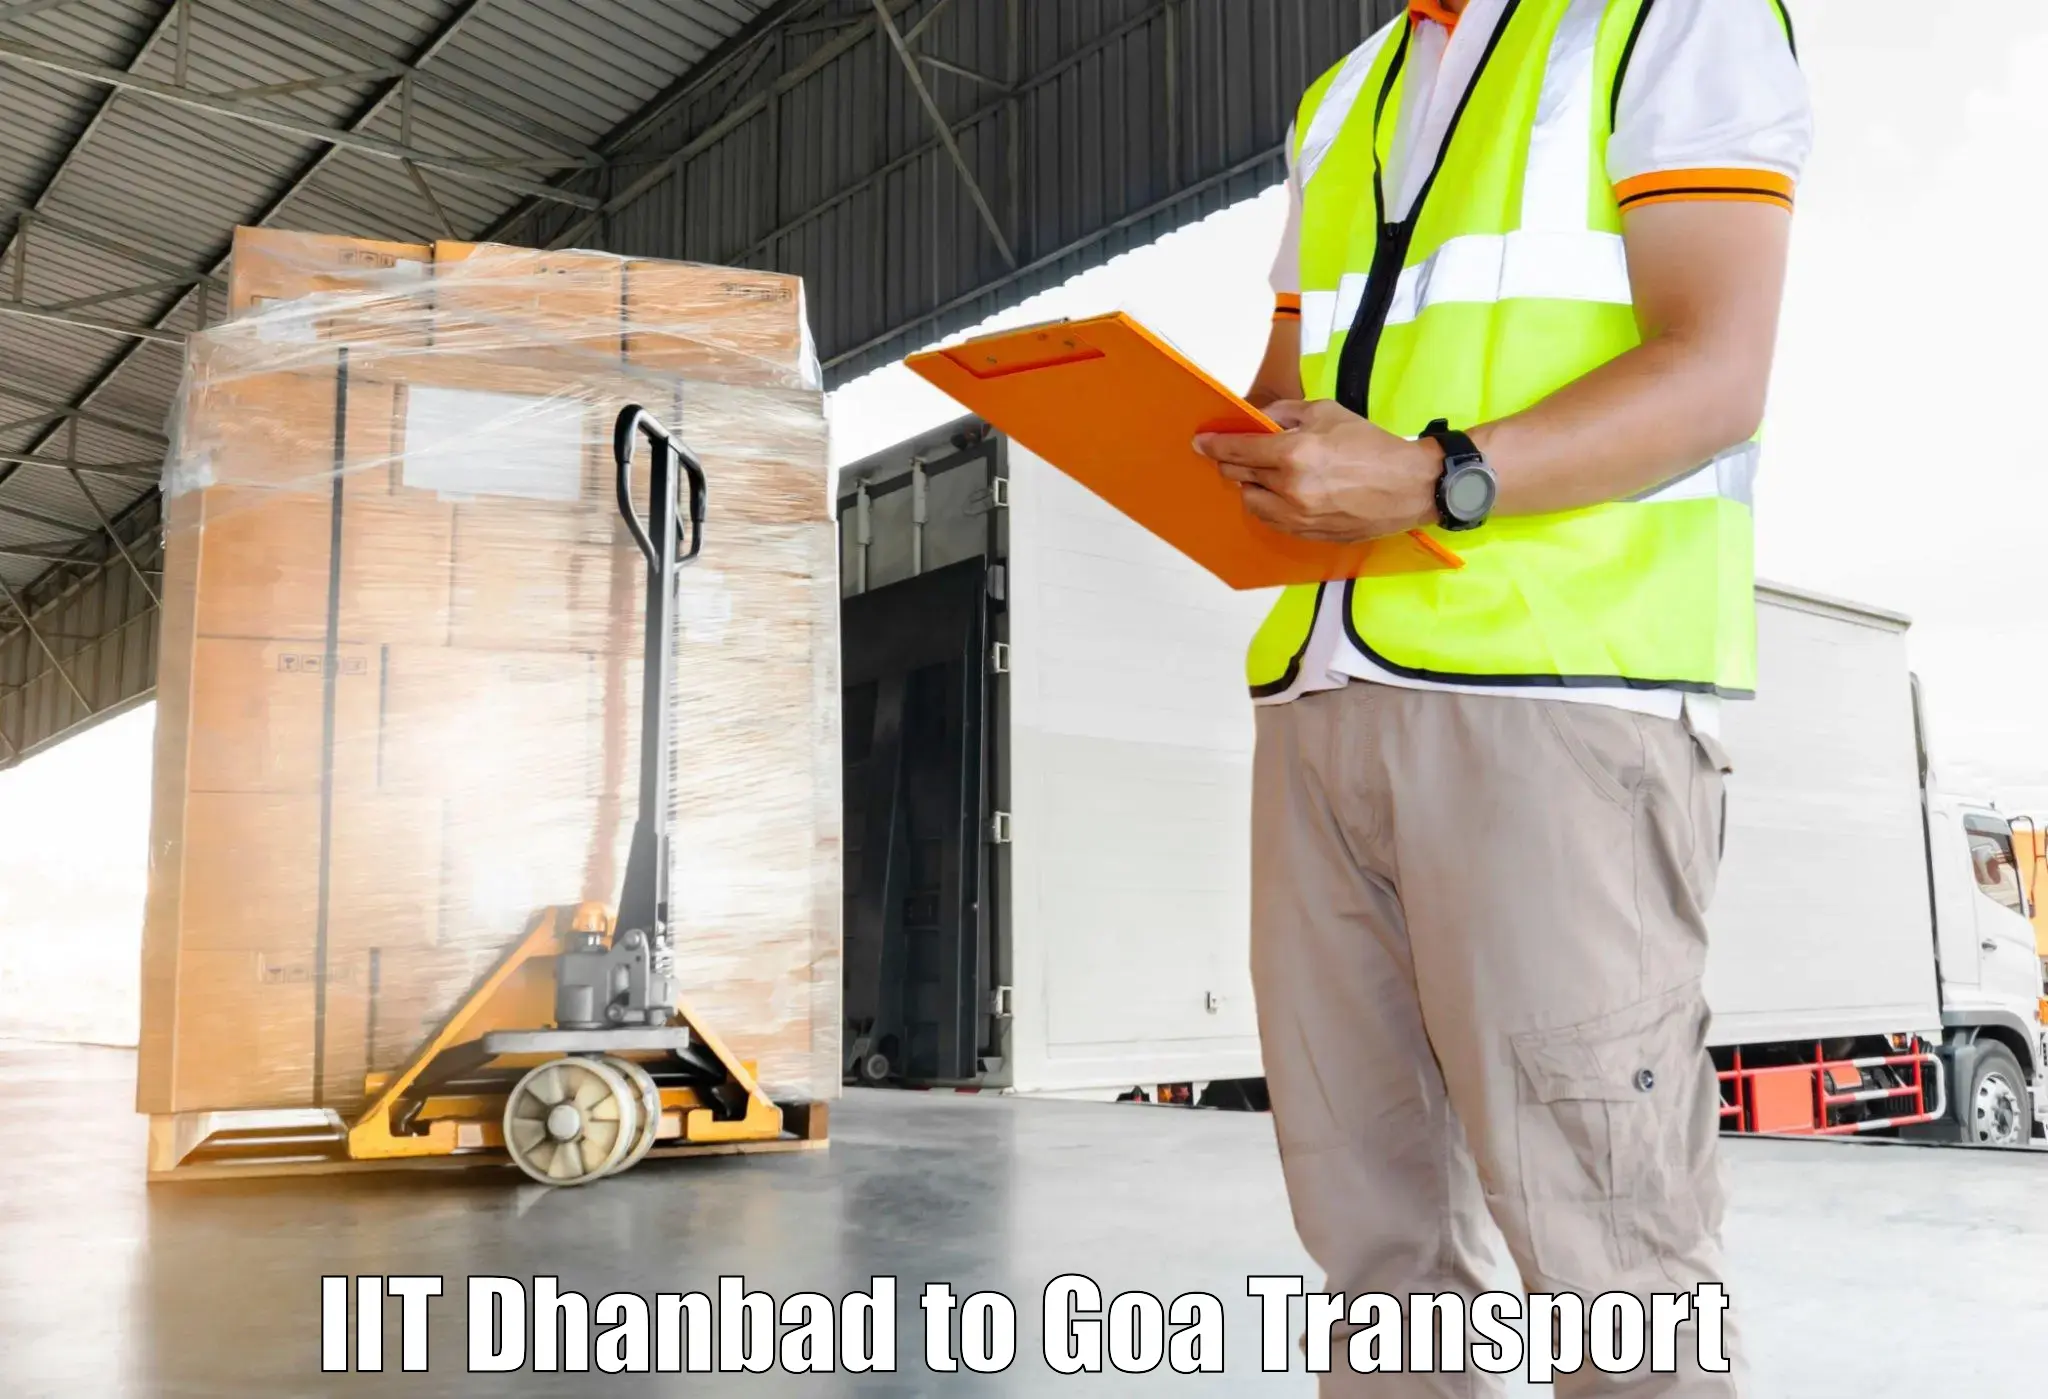 Transport bike from one state to another IIT Dhanbad to South Goa